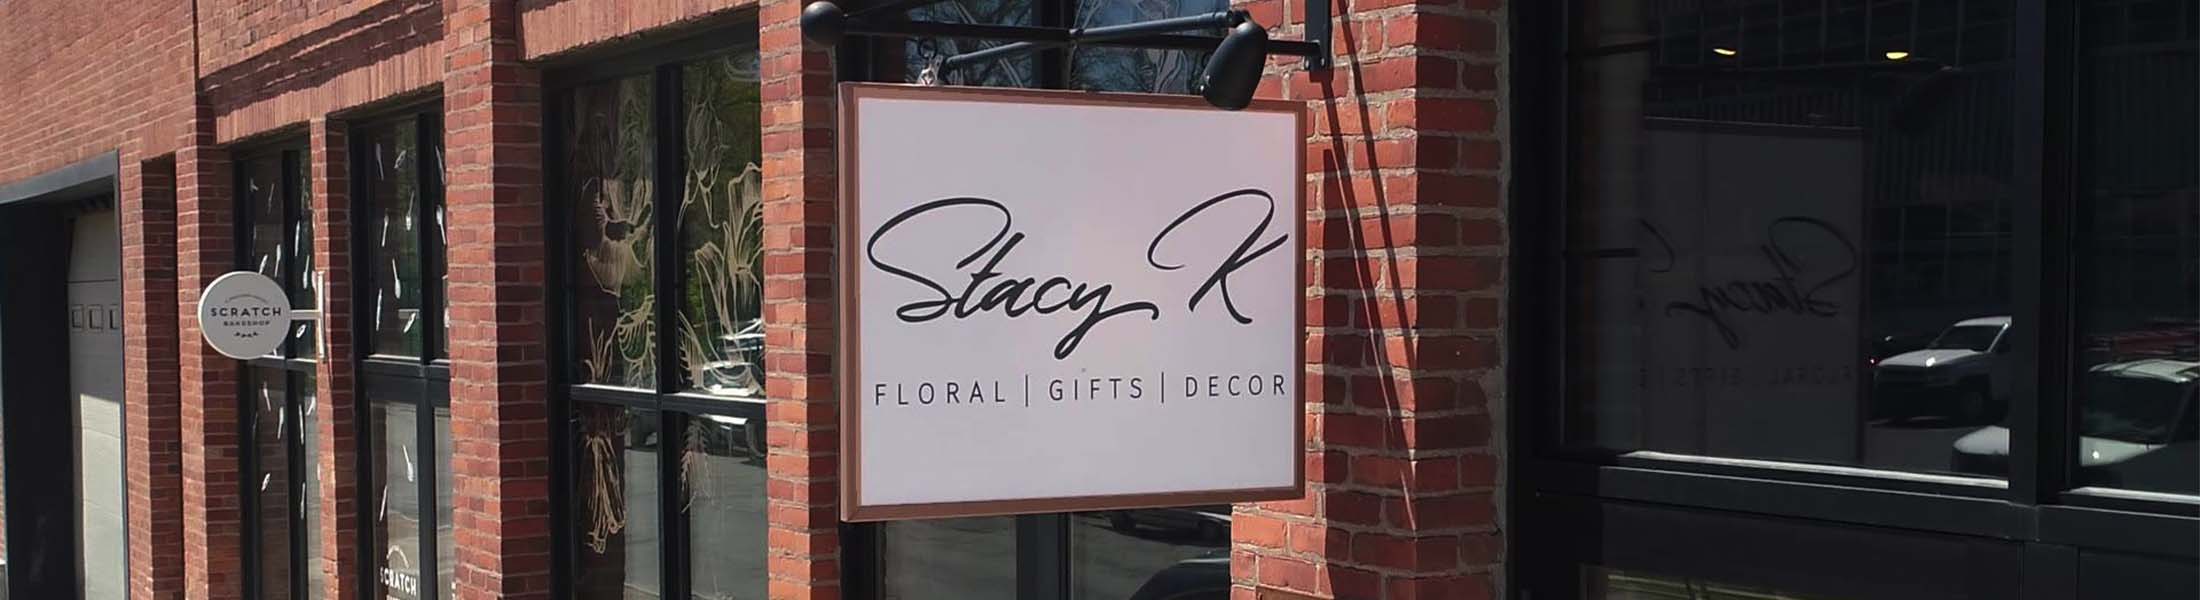 Stacy K Floral street view